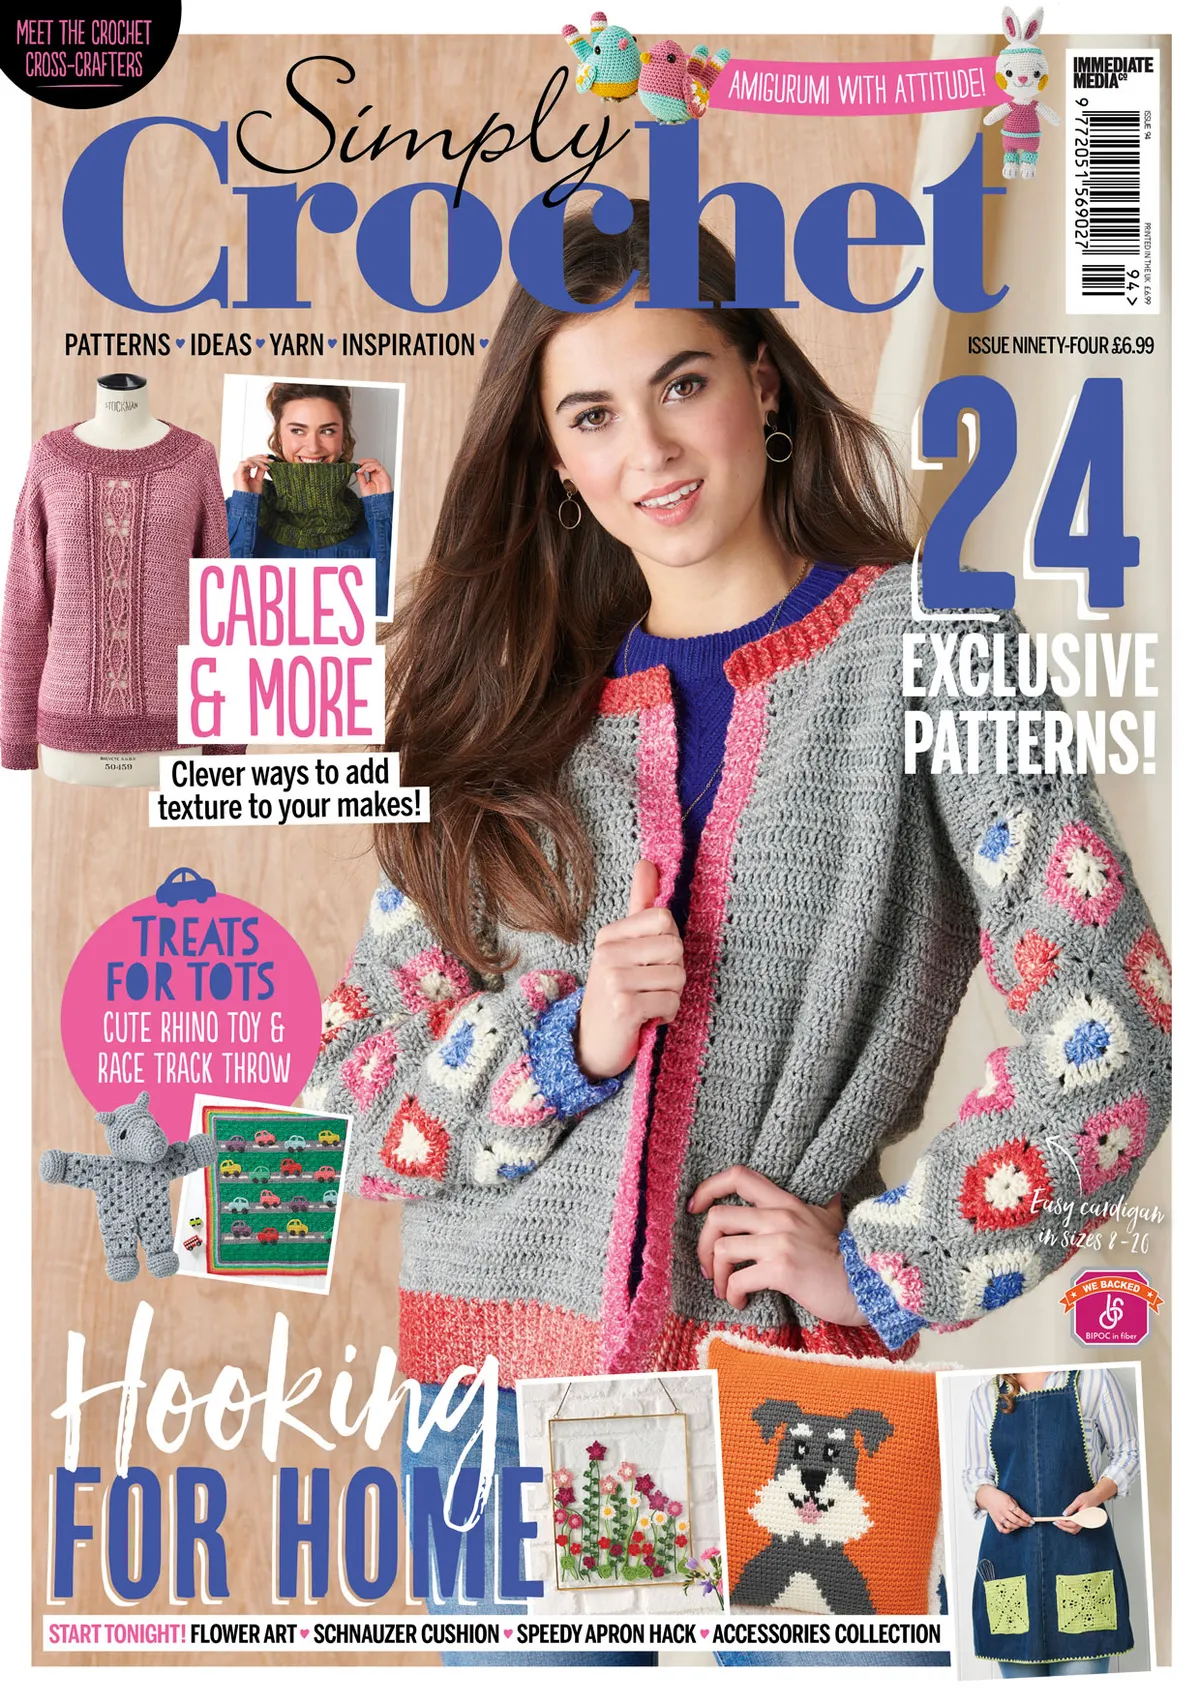 Simply_Crochet_issue94_cover